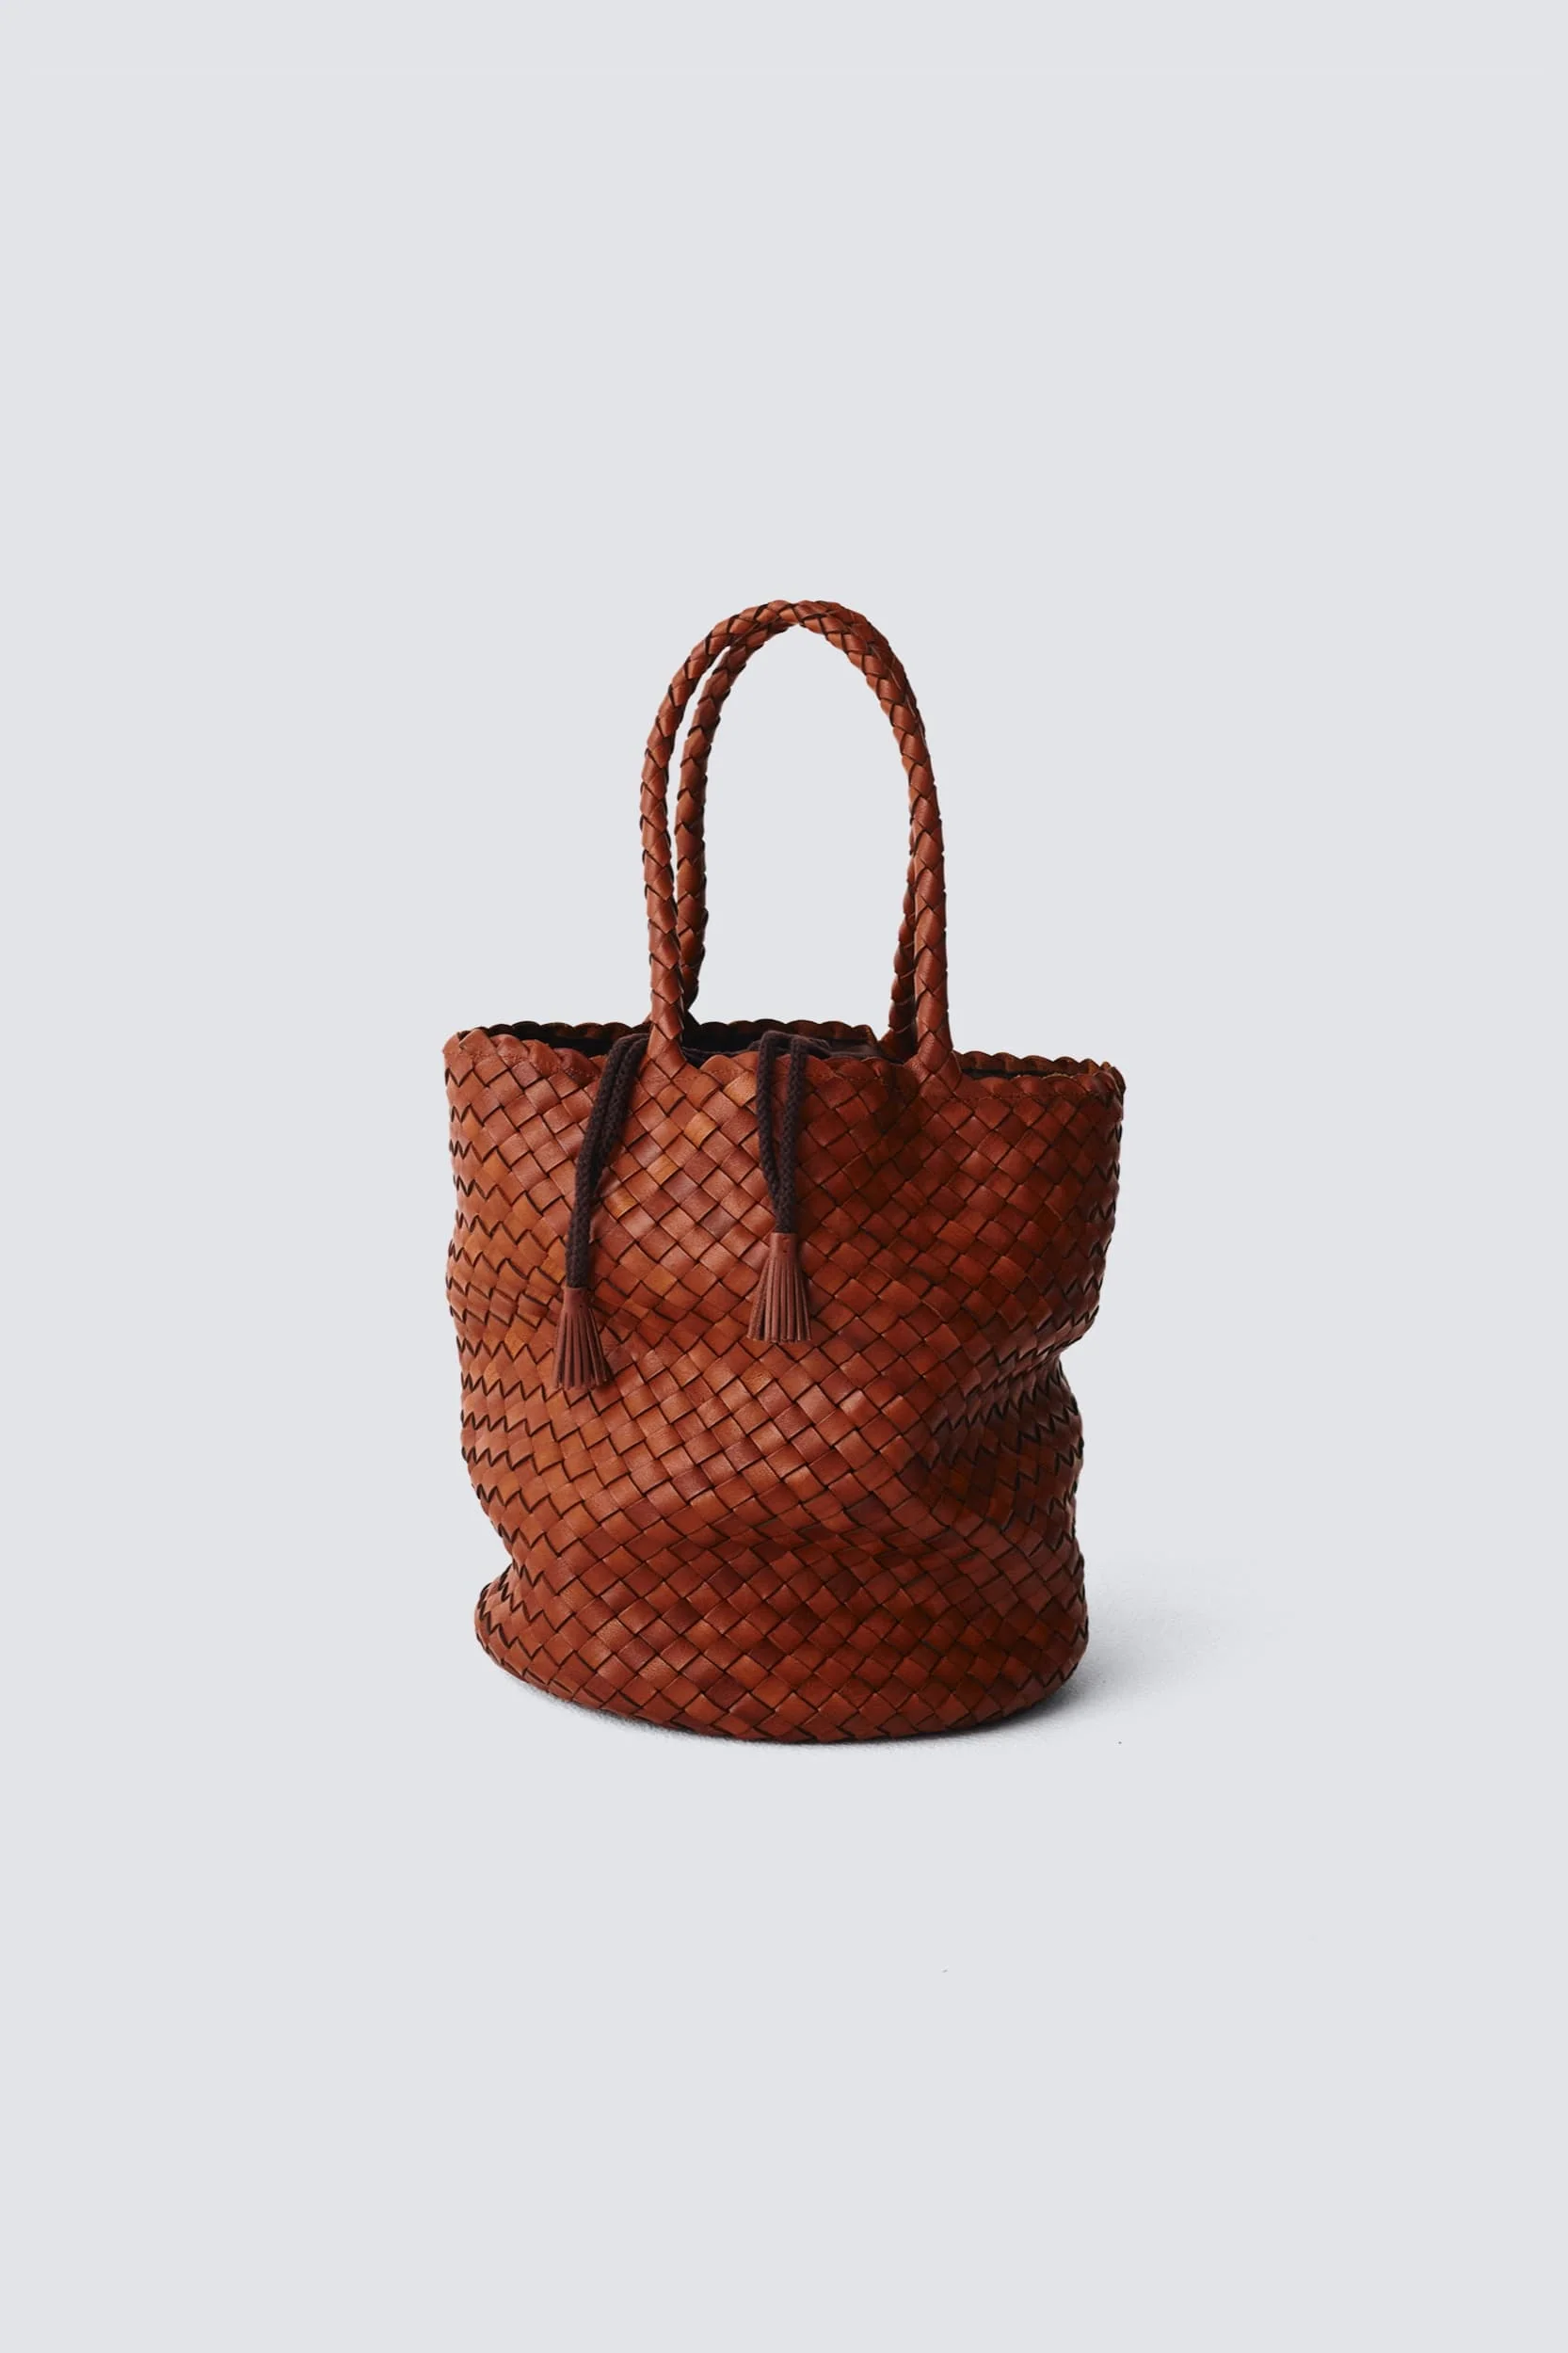 Women leather woven bags manufacturer